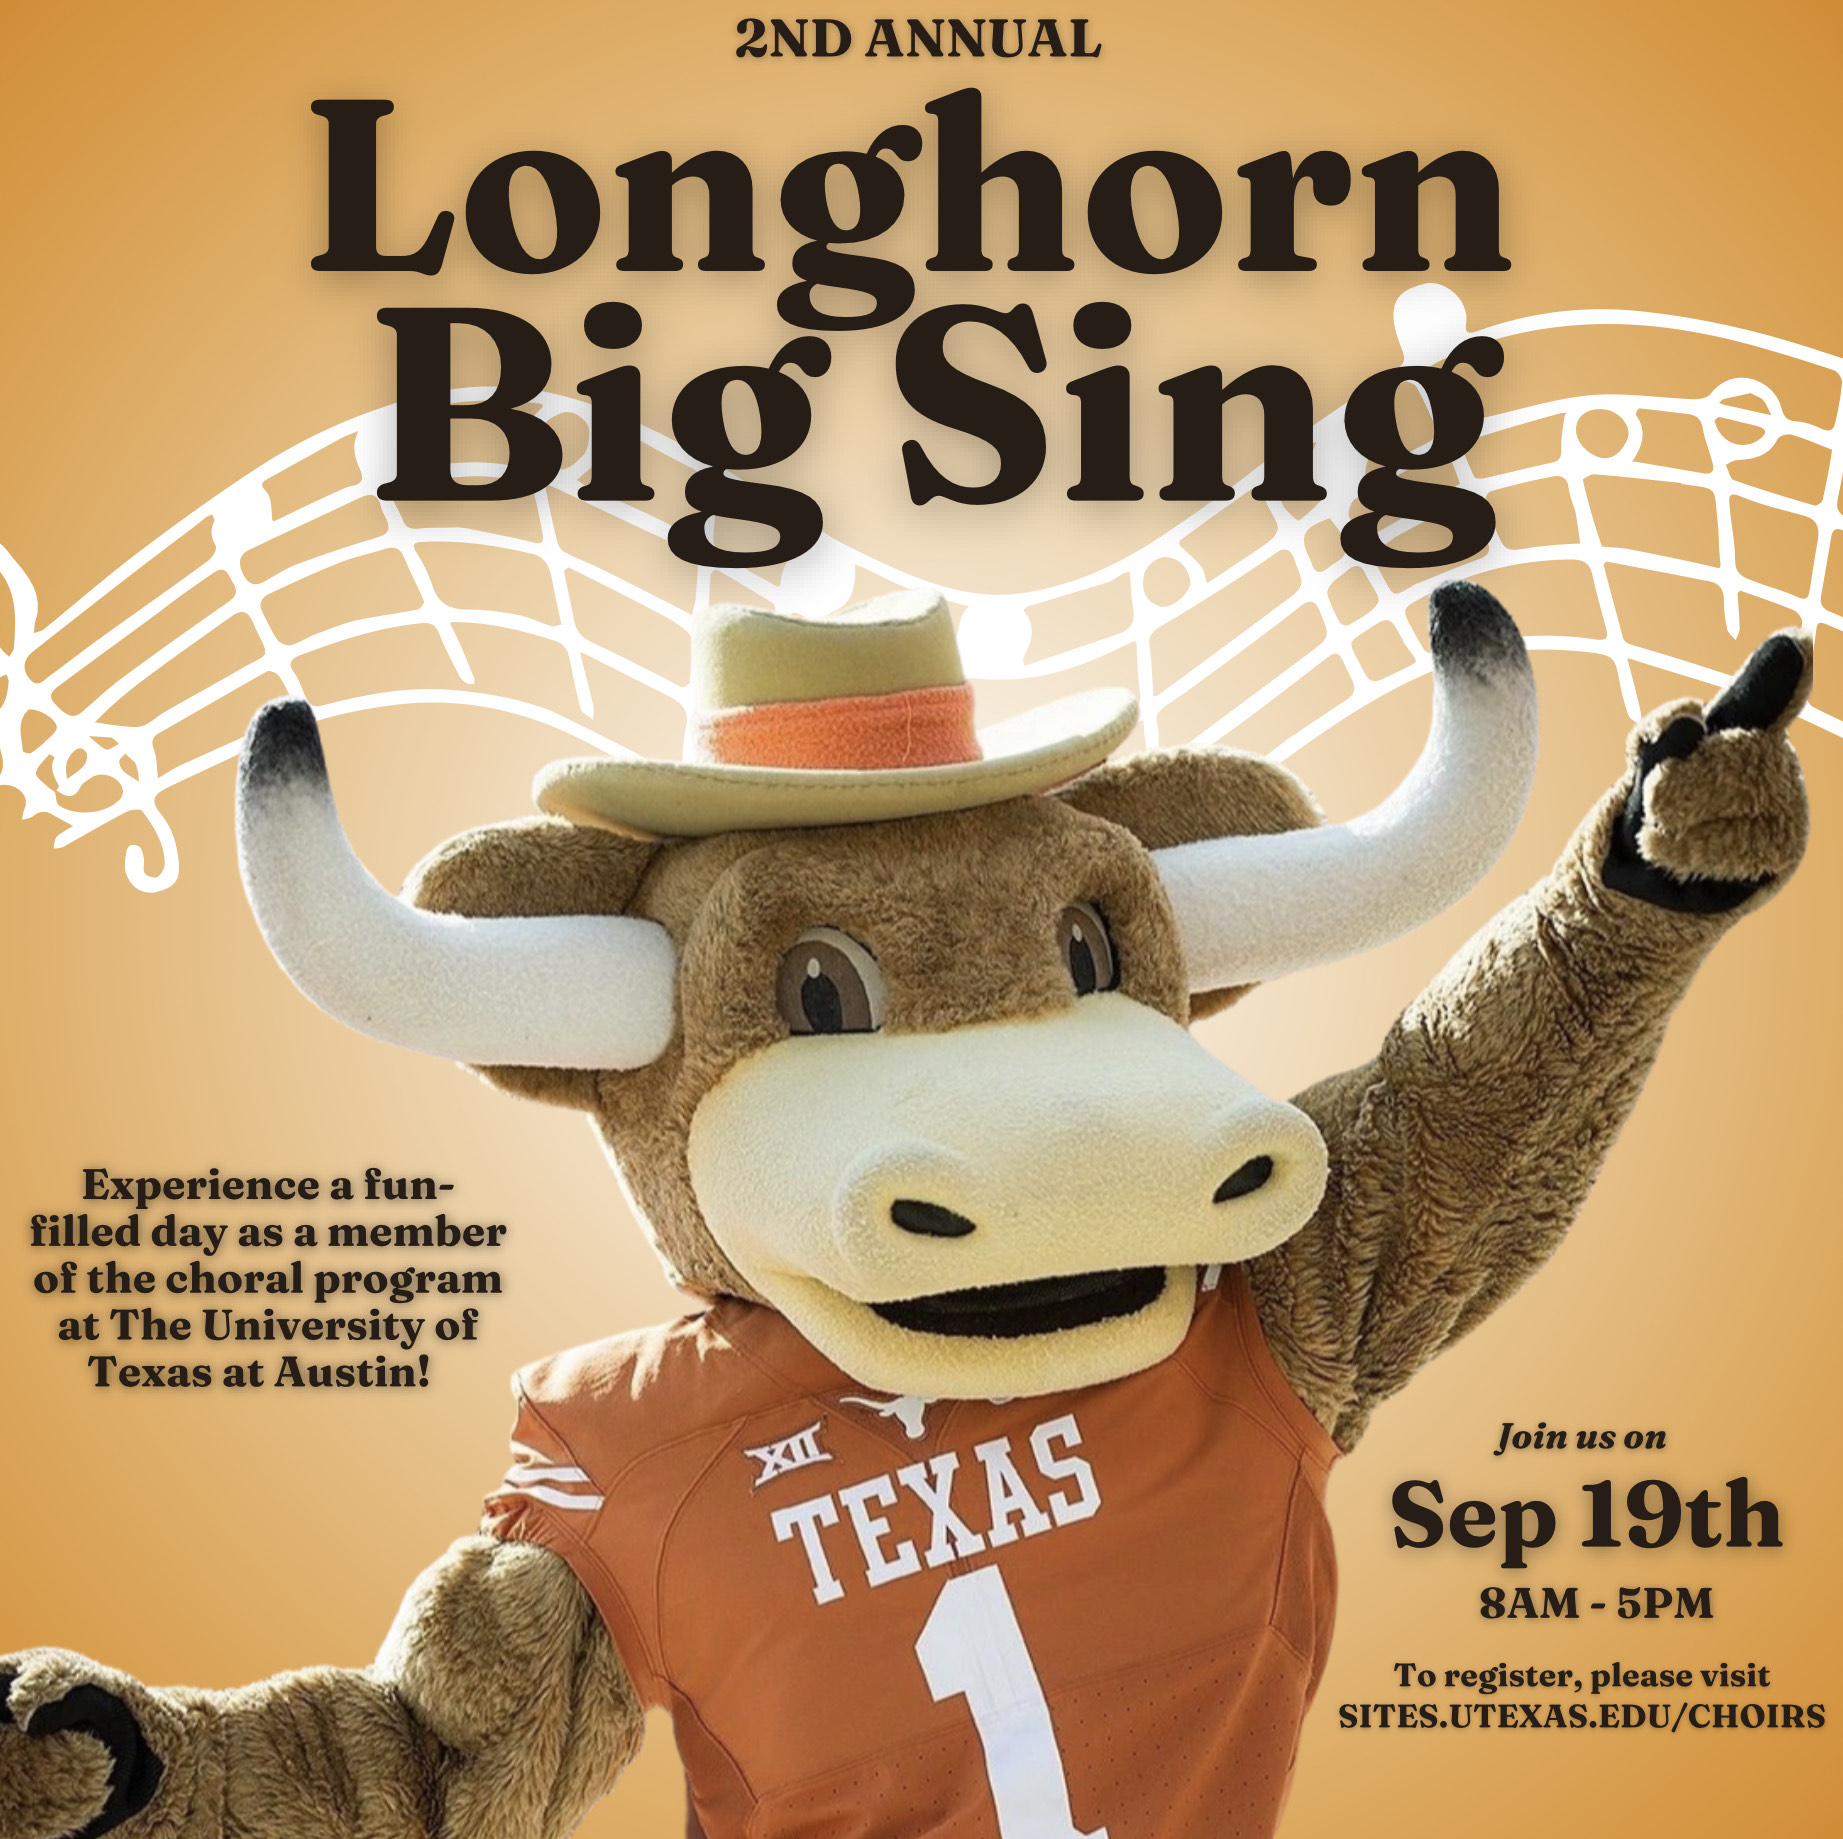 Poster for second annual Longhorn Big Sing on September 19th from 8 a.m. to 5 p.m.